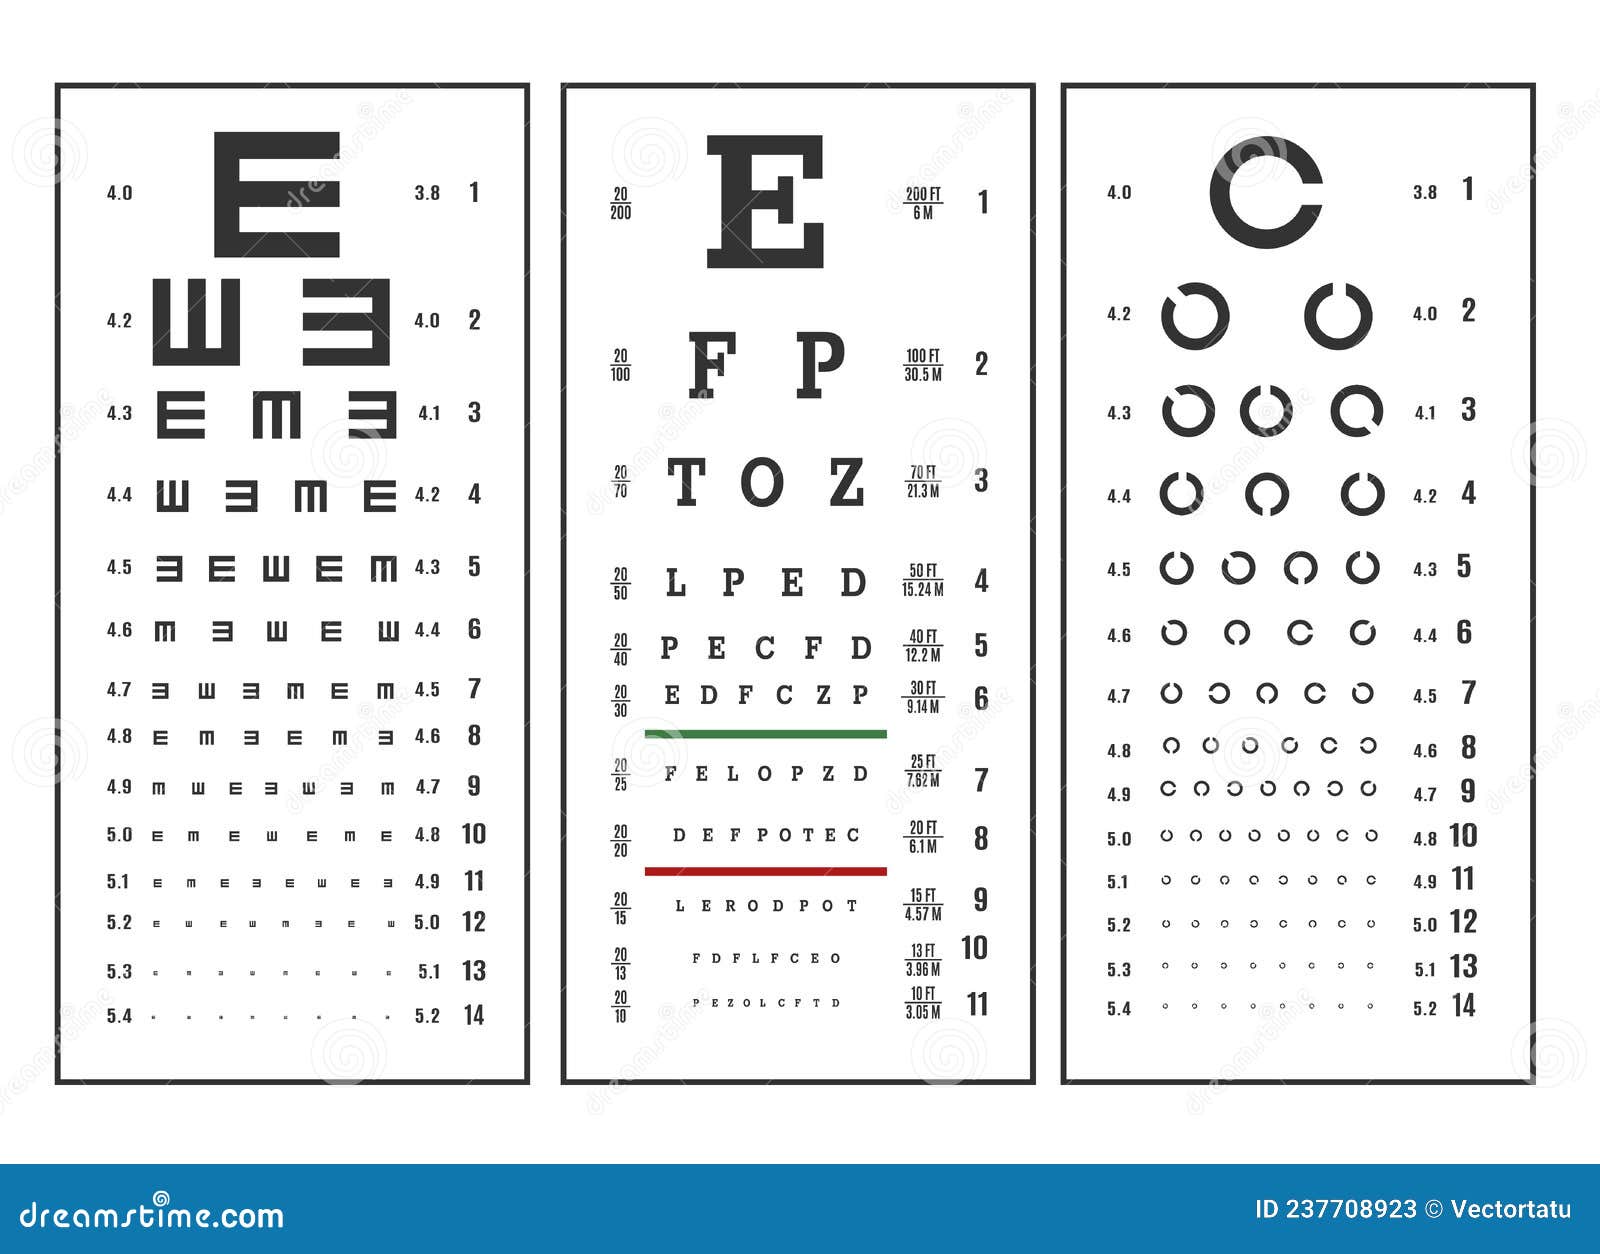 View test charts stock vector. Illustration of ophthalmic - 237708923